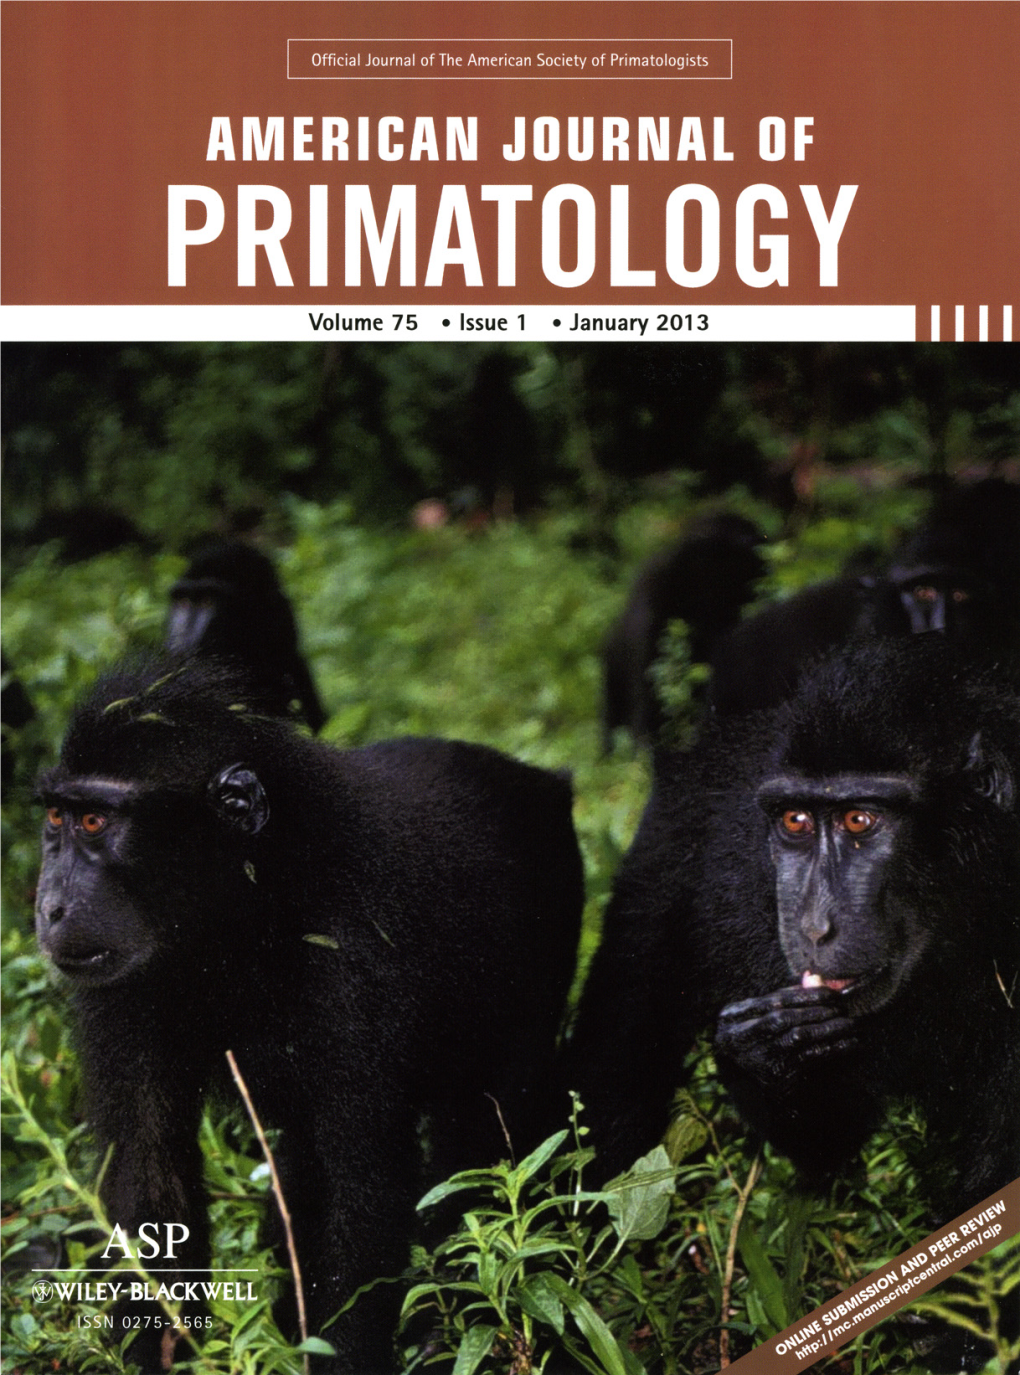 RESEARCH ARTICLE Long-Term Population Survey of the Sulawesi Black Macaques (Macaca Nigra) at Tangkoko Nature Reserve, North Sulawesi, Indonesia